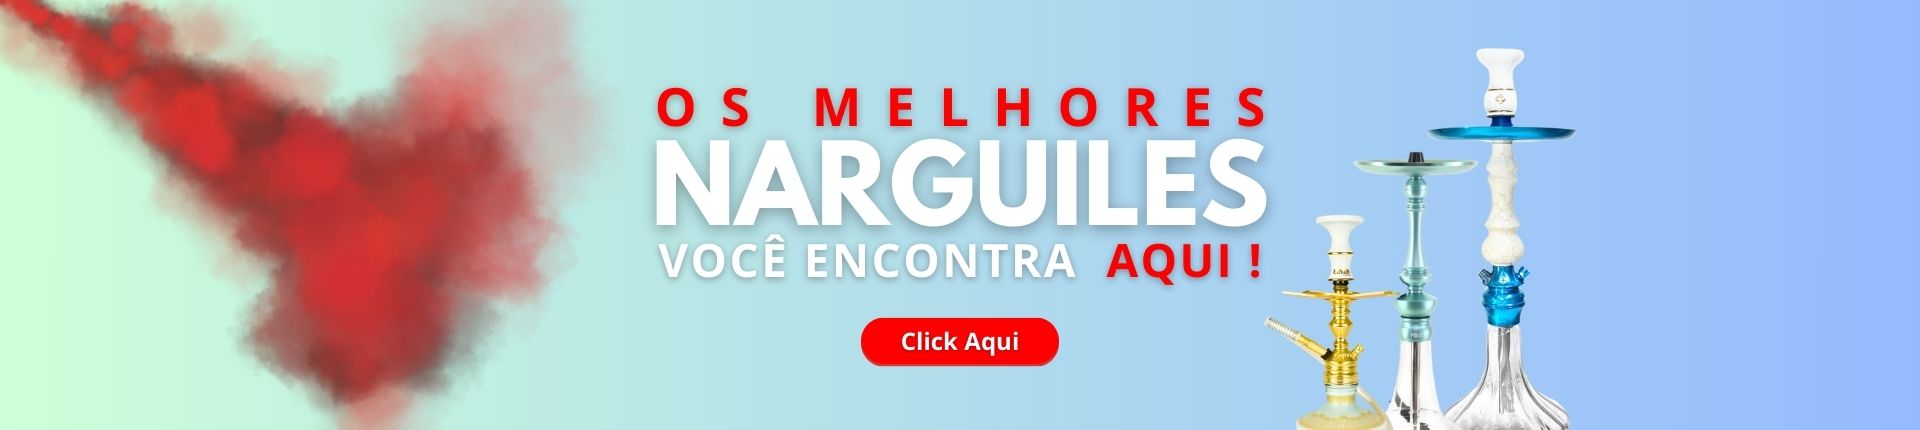 NARGUILE 20% OFF